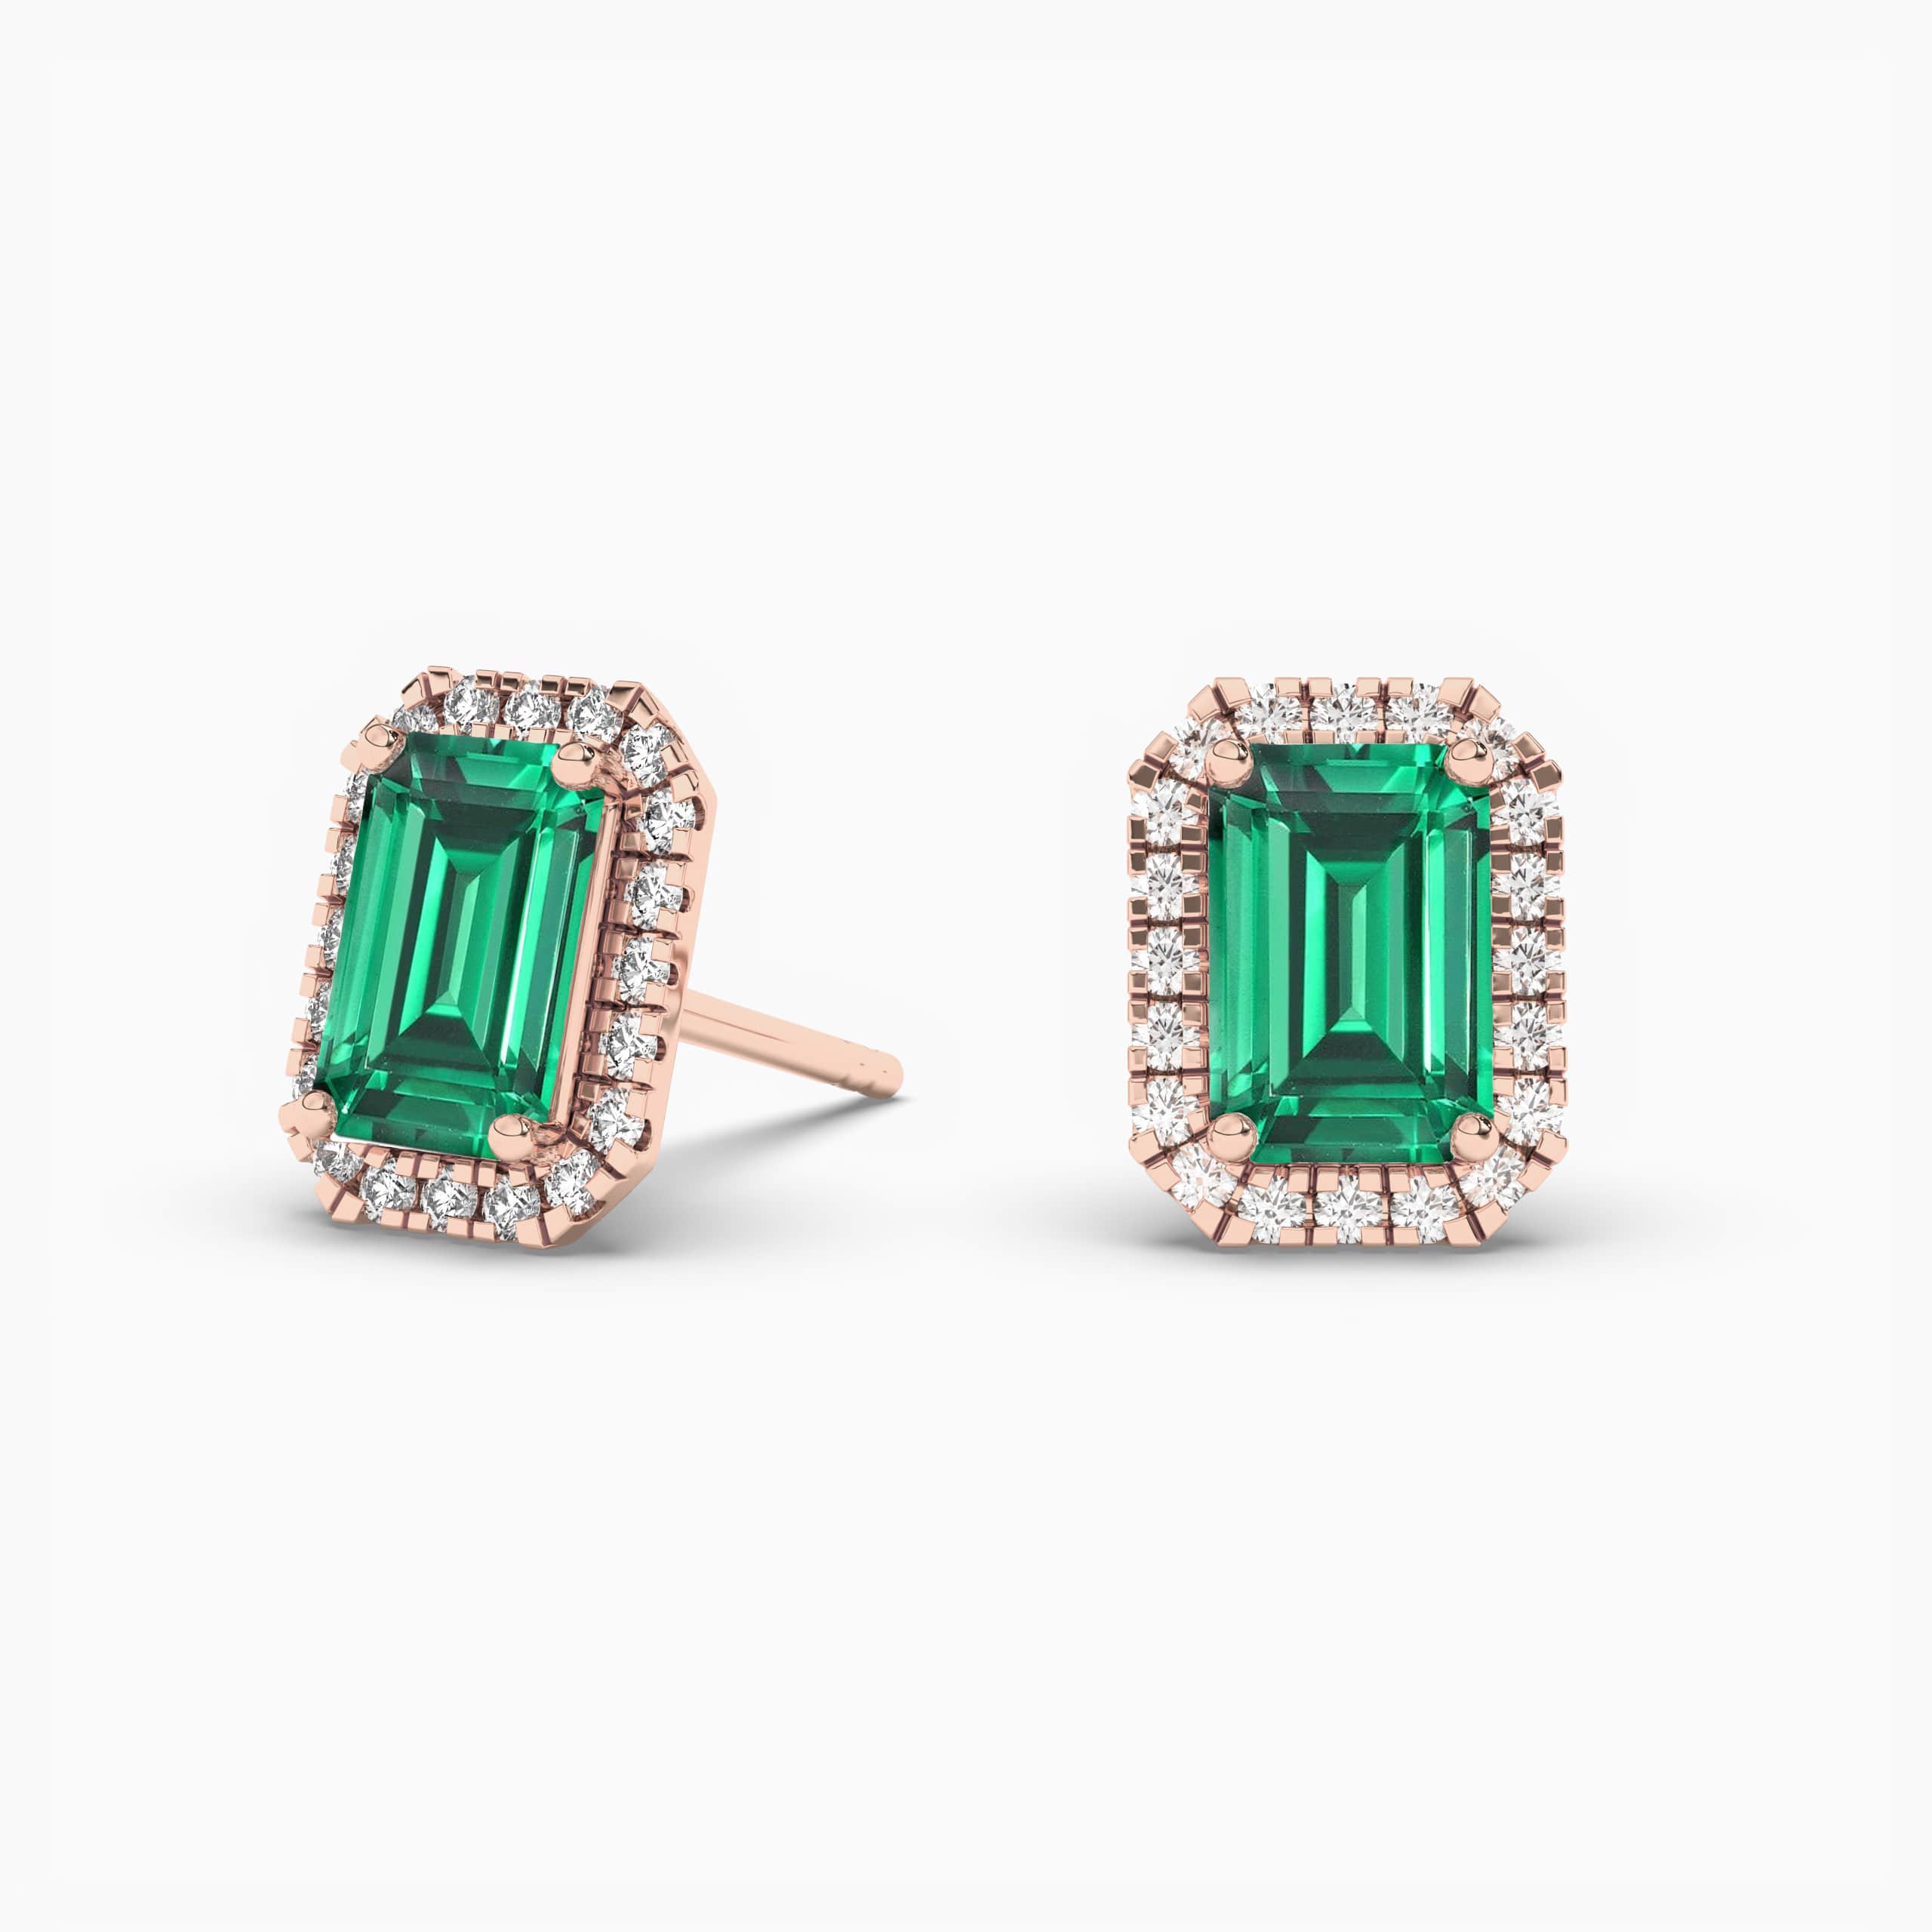  Emerald Cut Emerald Earrings With Round Diamonds Rose Gold